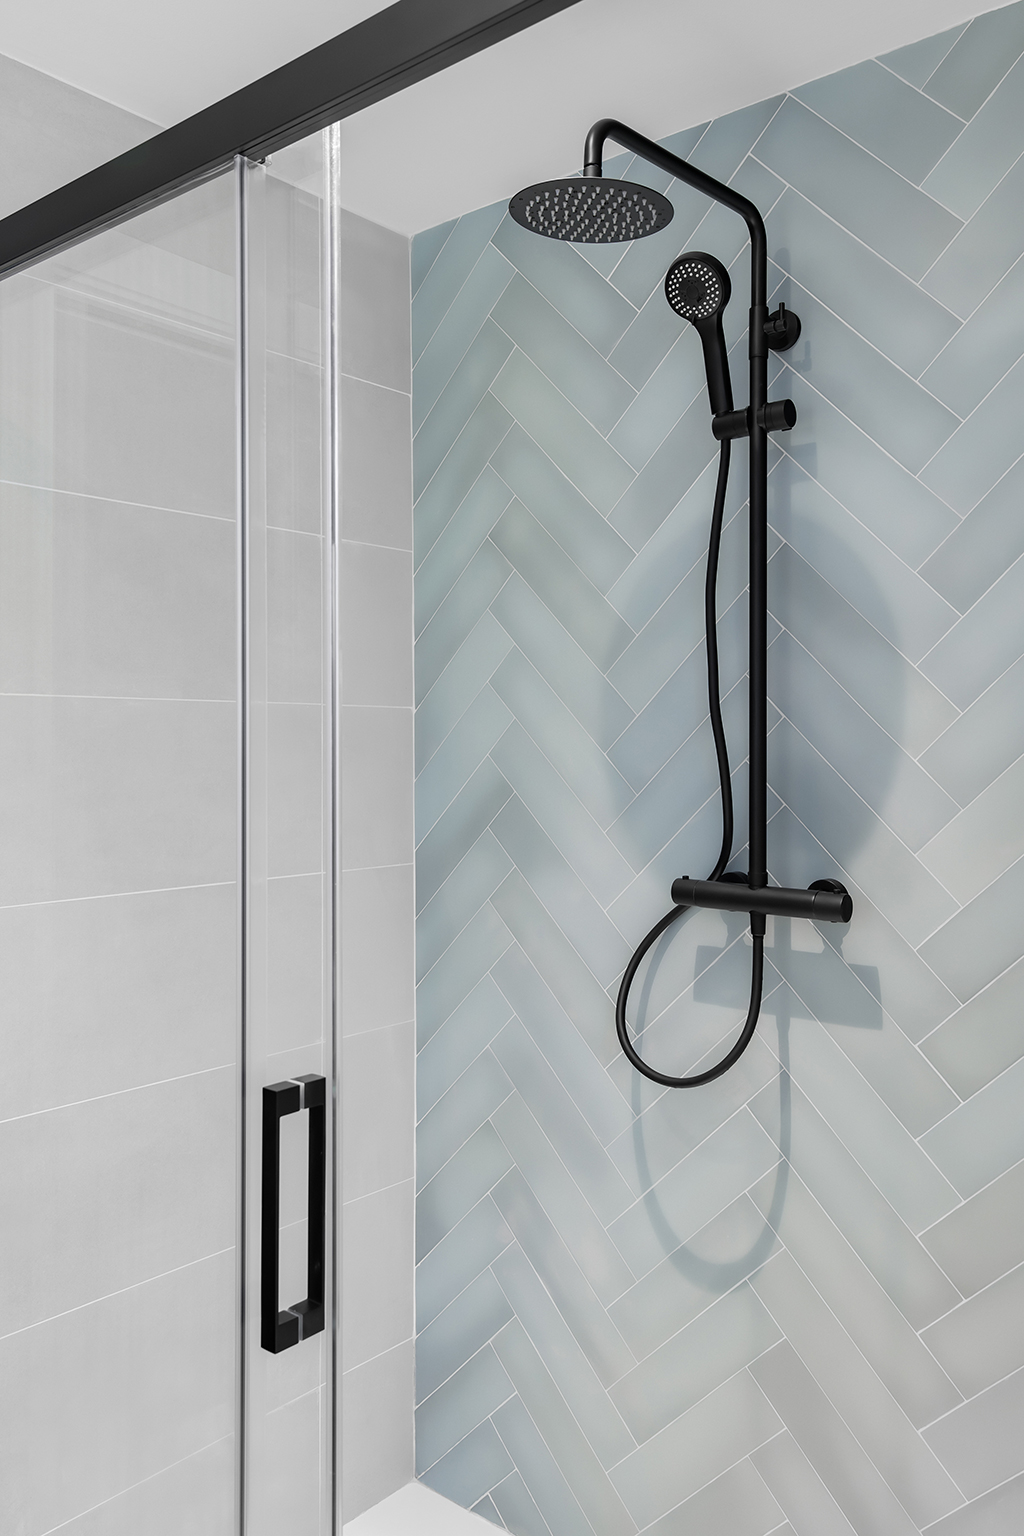 4 Things To Consider When A Plumbing Company Installs A Shower | Conway, SC